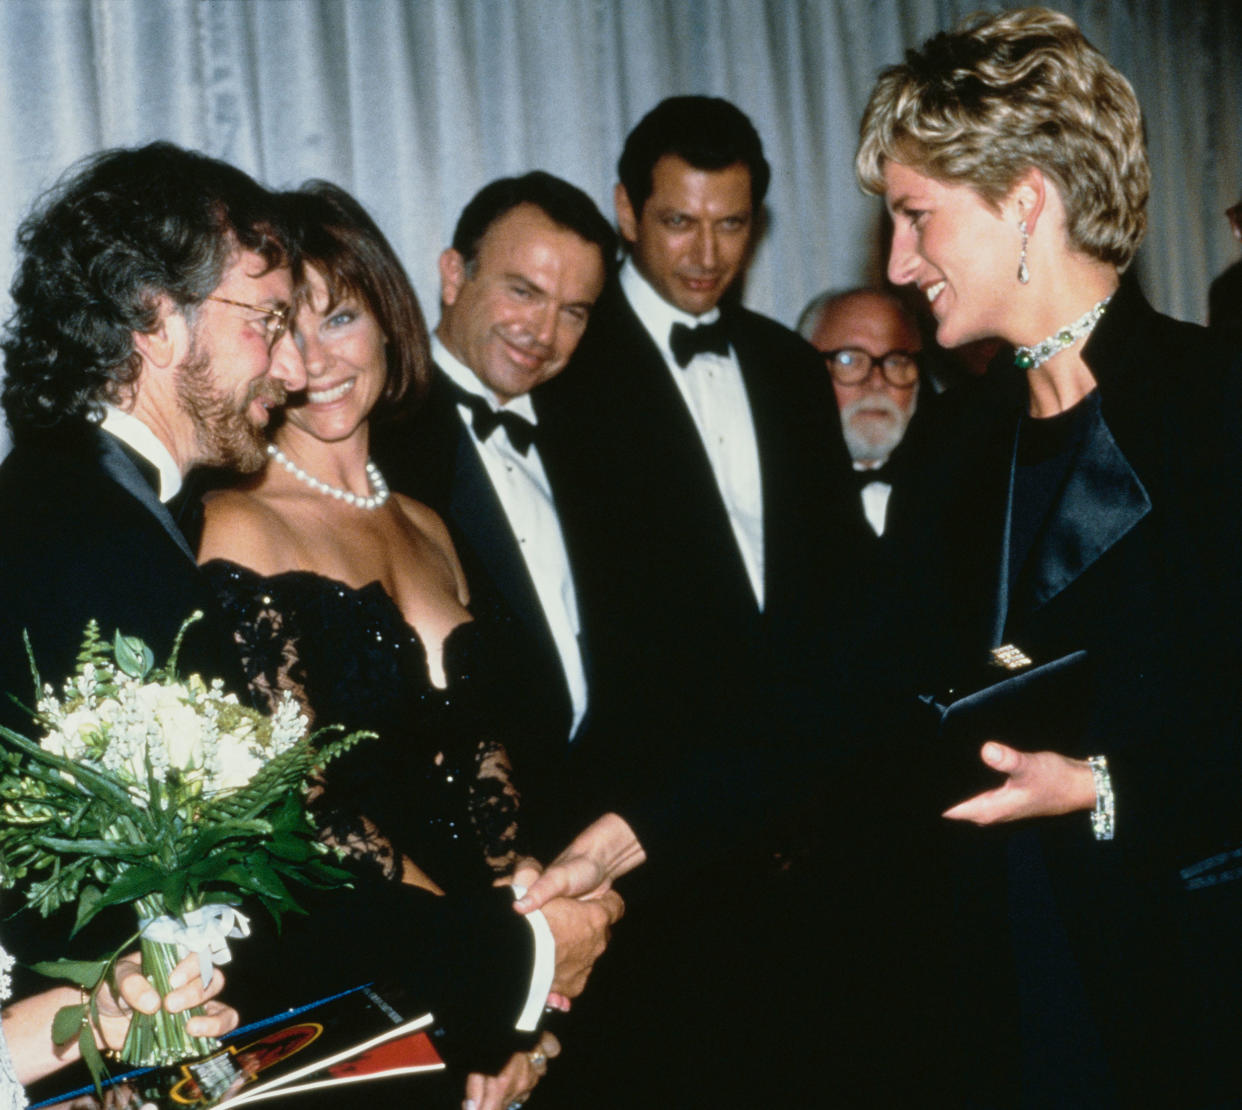 Princess Diana meets Stephen Spielberg at the 